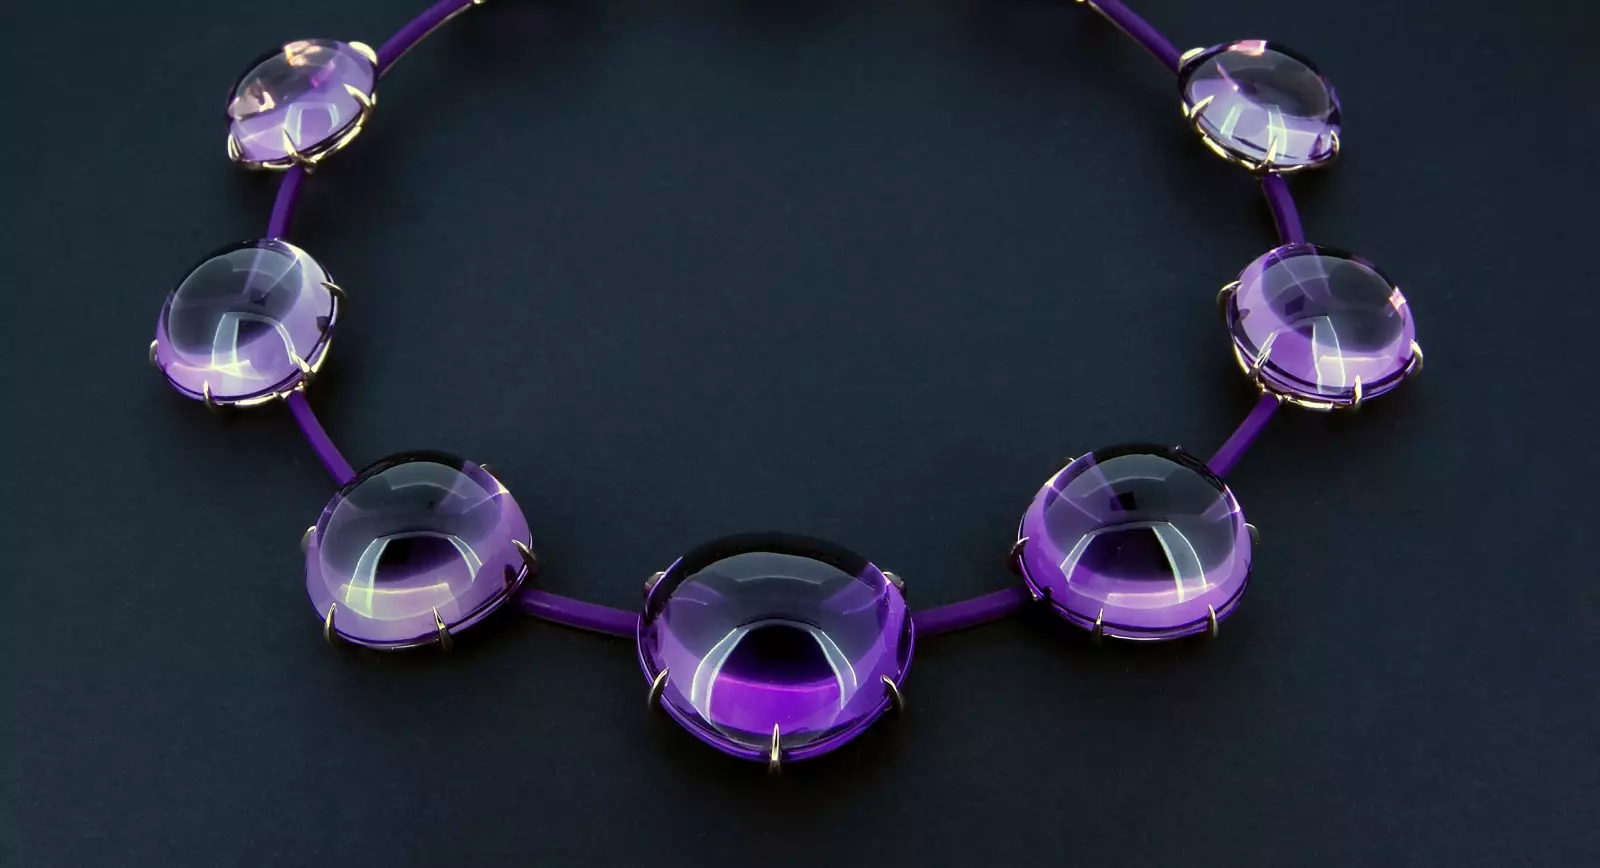 Taffin necklace with 841.70 carats of amethysts and purple ceramic in 18k rose gold 